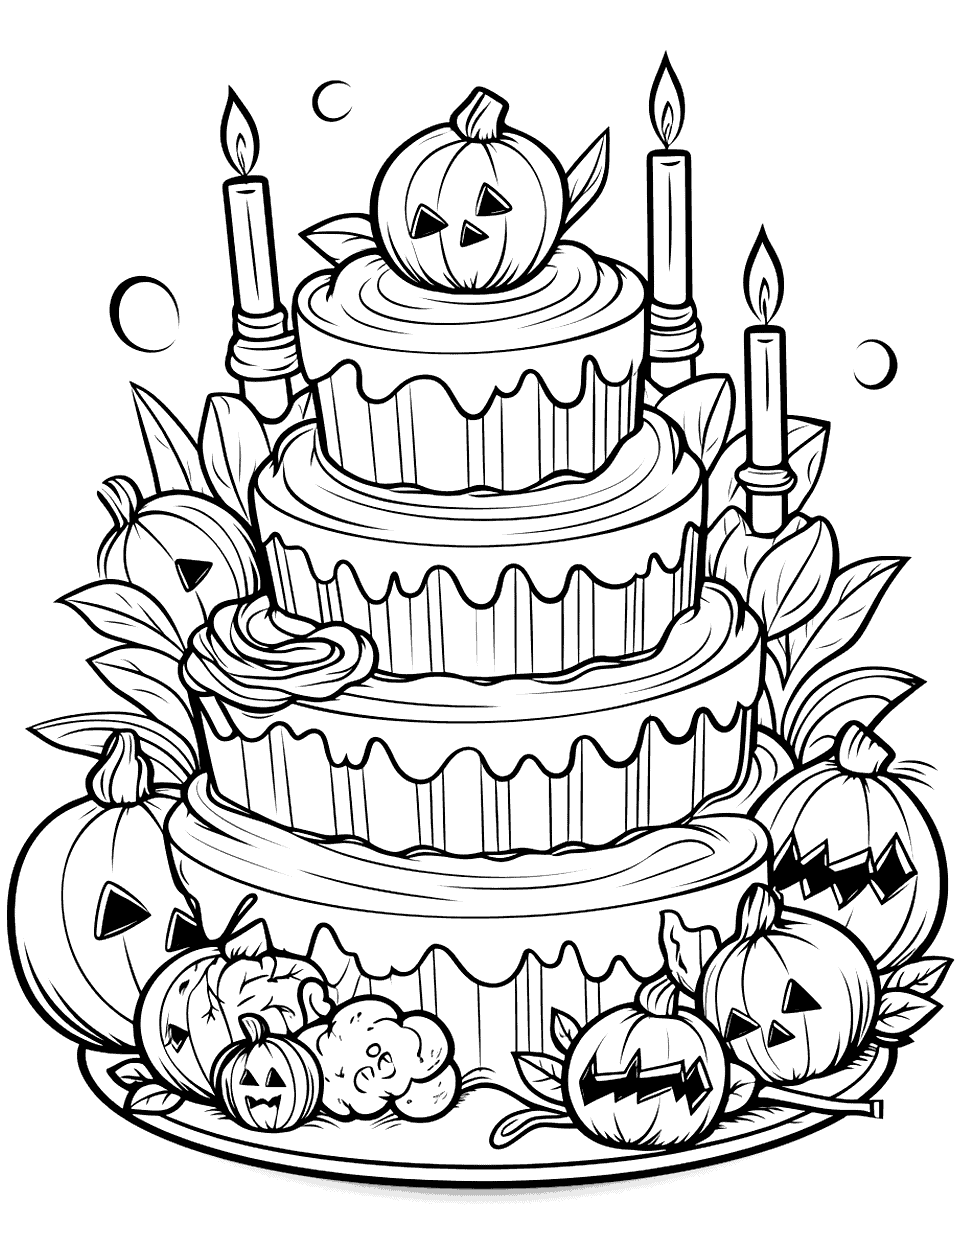 Halloween Spooktacular Cake Coloring Page - A Halloween-themed cake with pumpkins and other decorations.